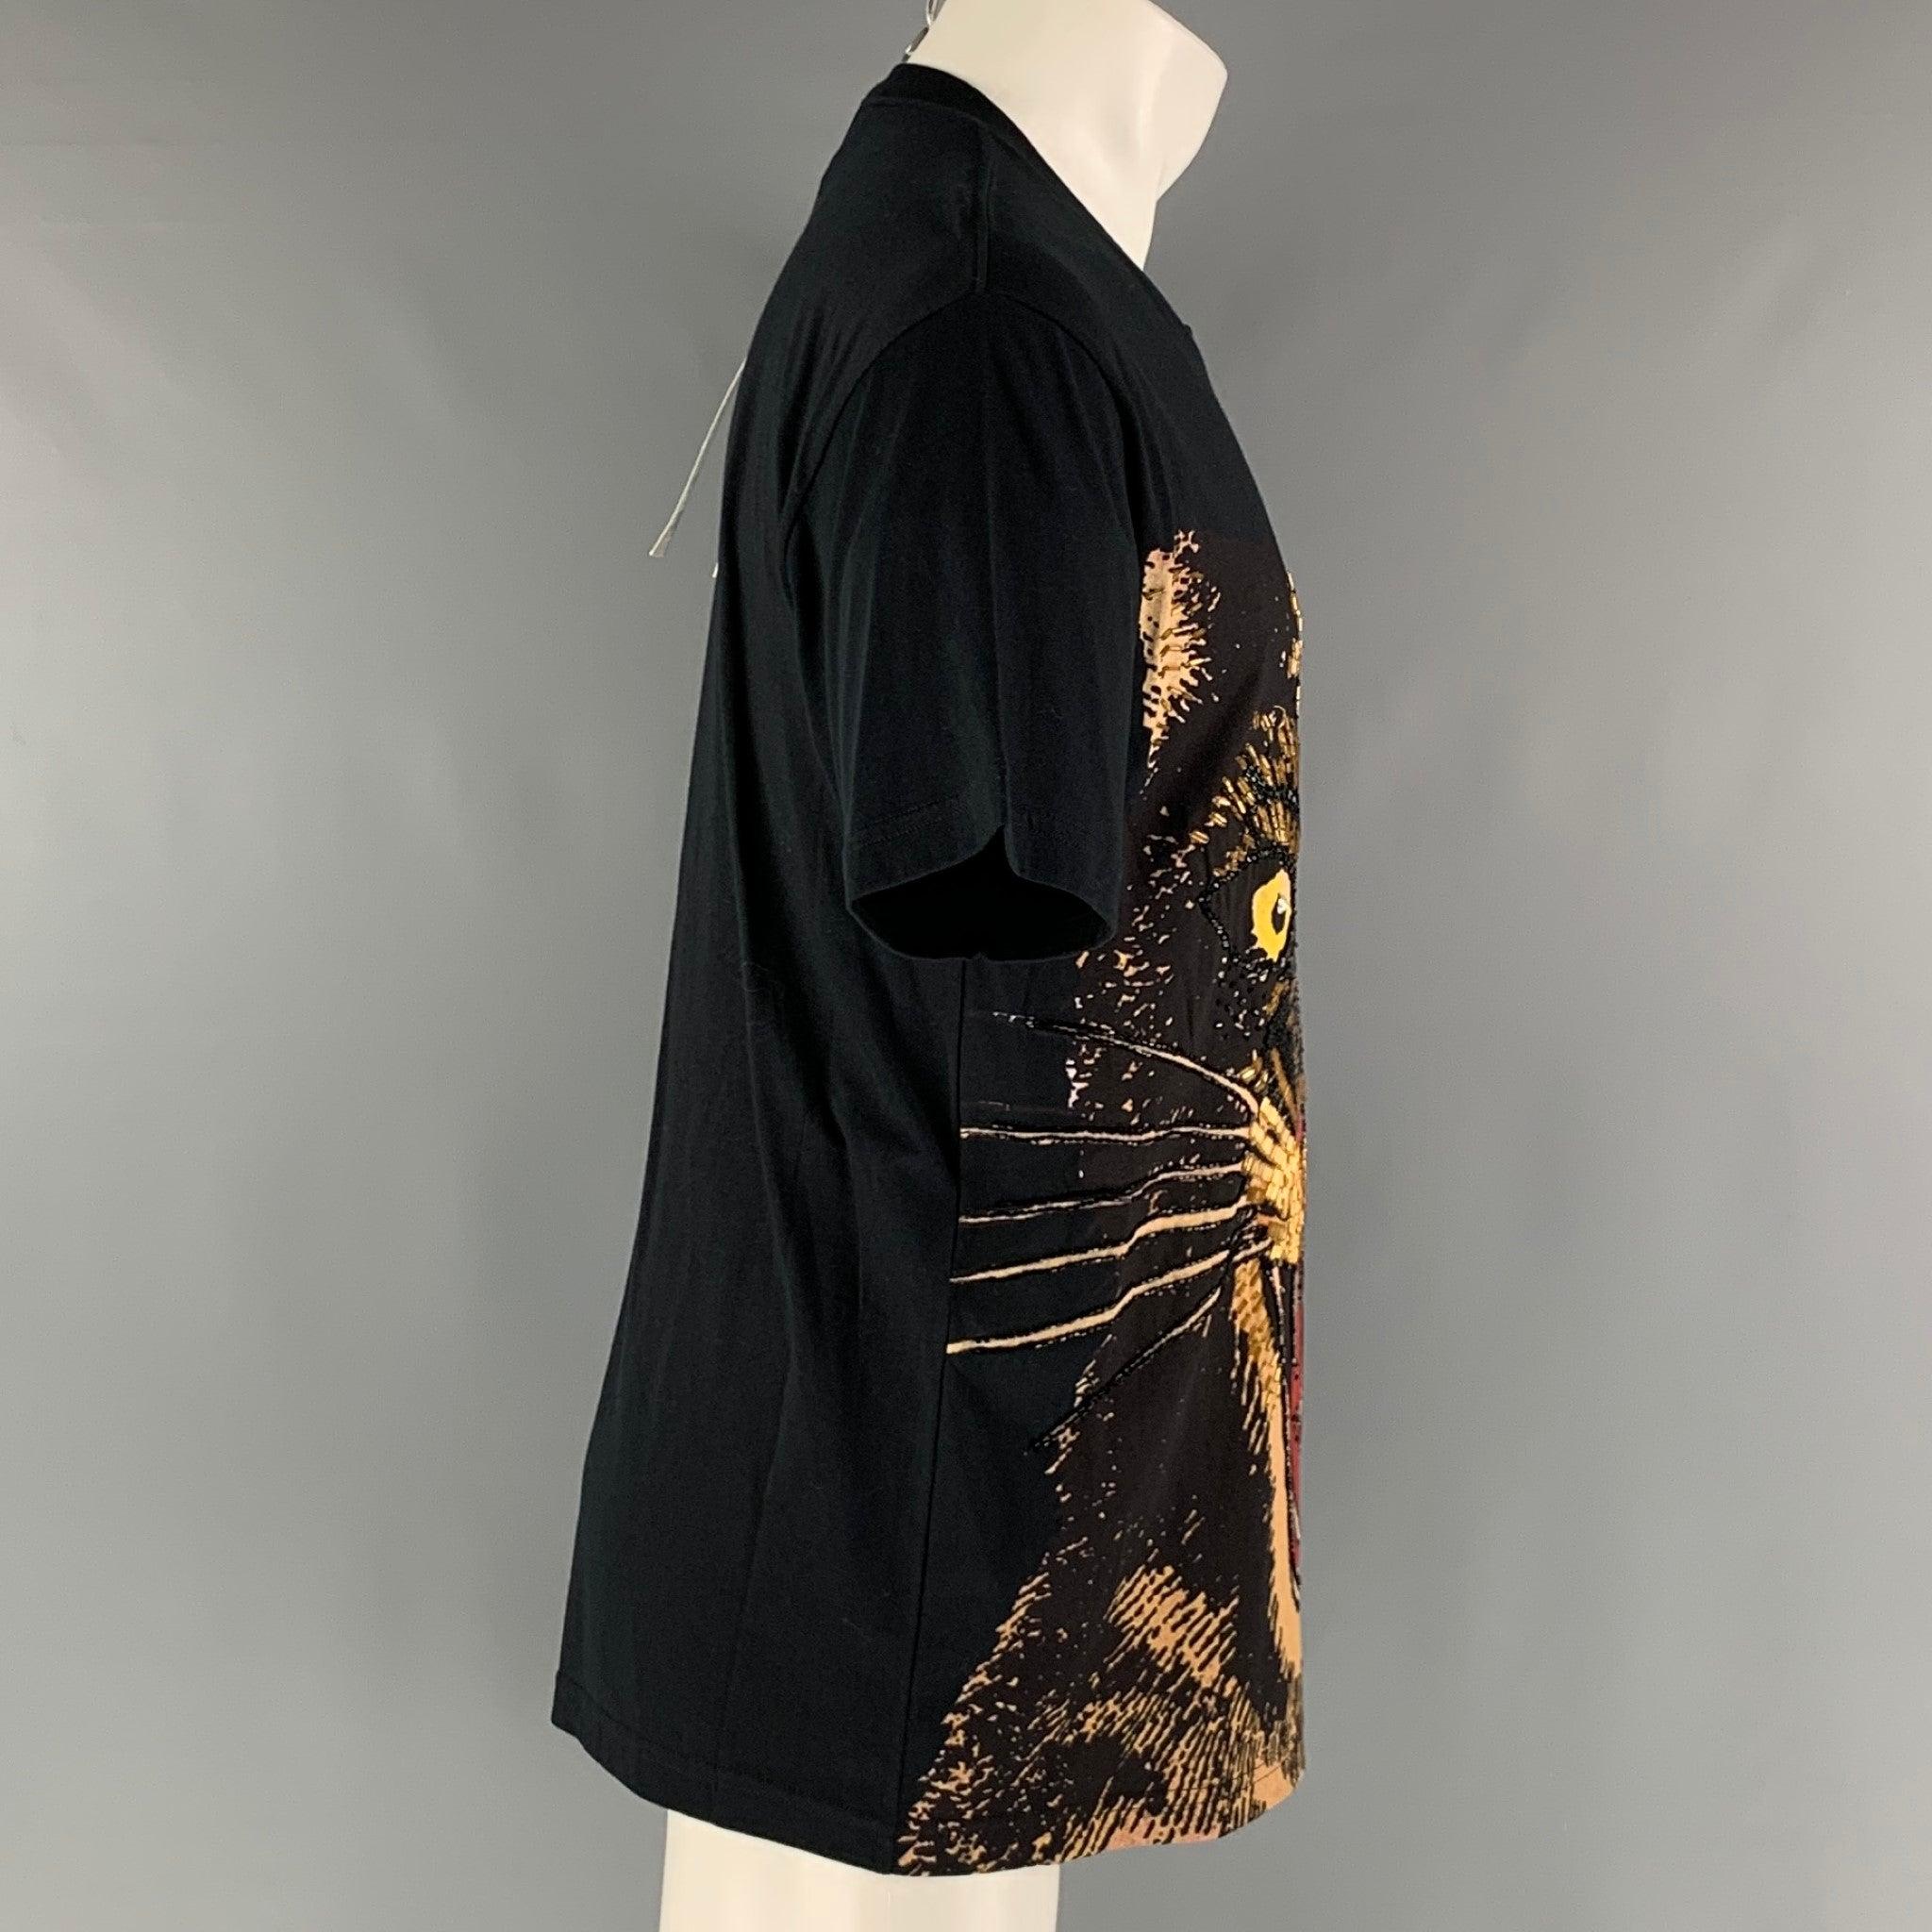 GUCCI F/W 2019 oversized t-shirt comes in a black jersey cotton knit material featuring a feline print with bead and sequin embroidery design at front and a crew-neck. Made in Italy.New with Tags. 

Marked:   XXS 

Measurements: 
 
Shoulder: 21.5